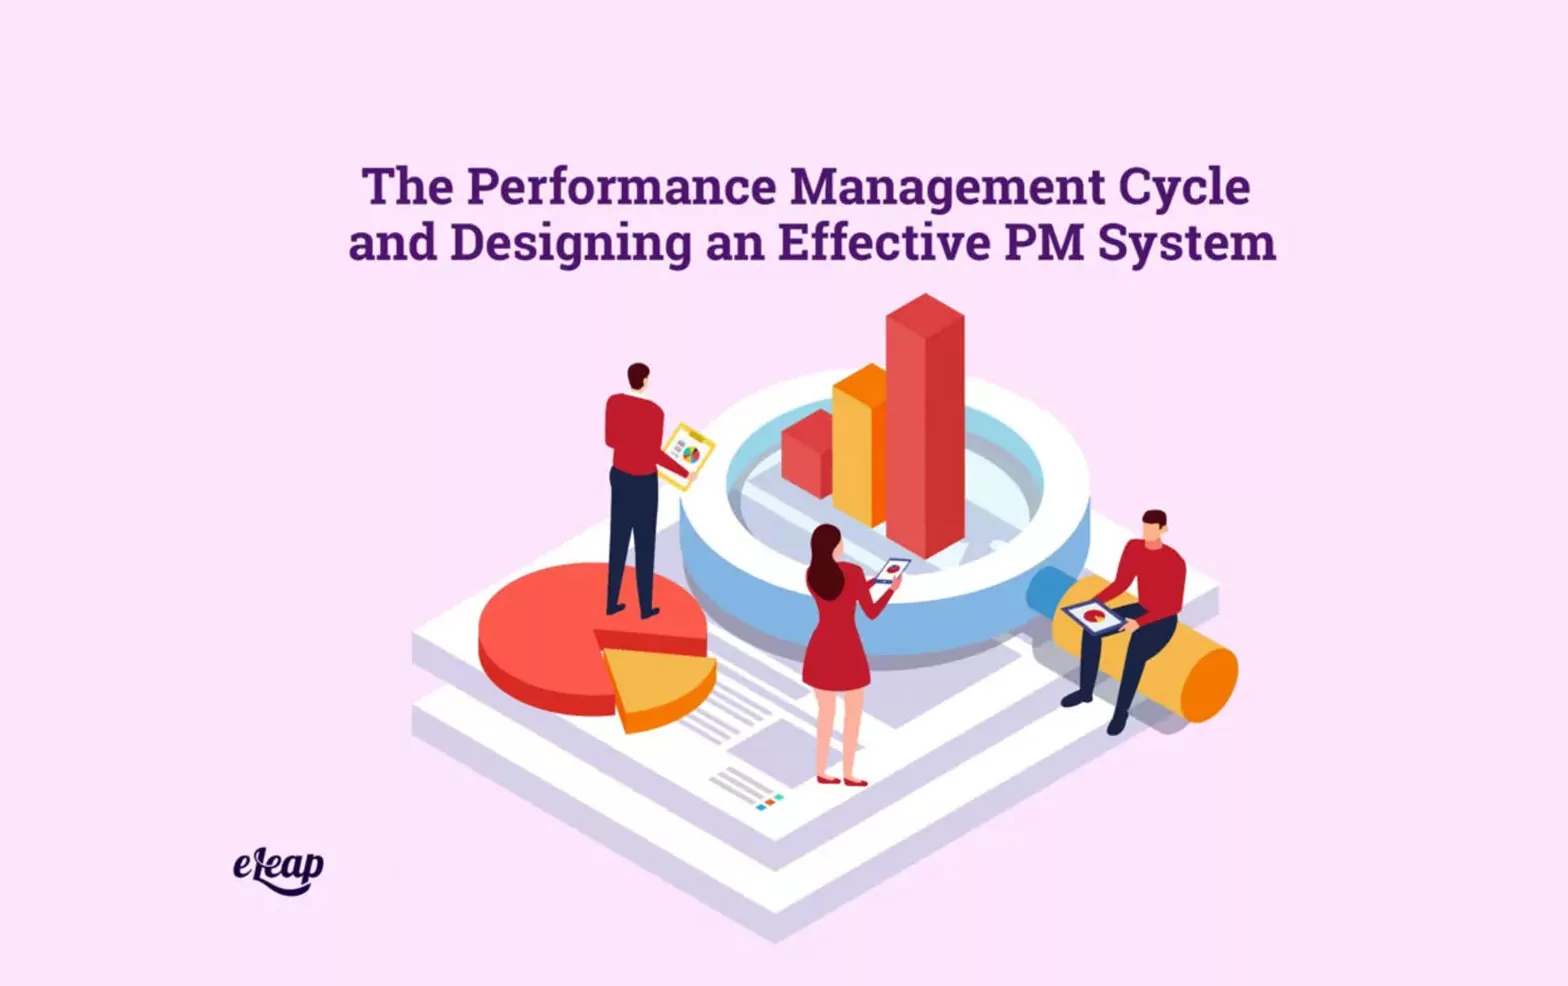 The Performance Management Cycle and Designing an Effective PM System